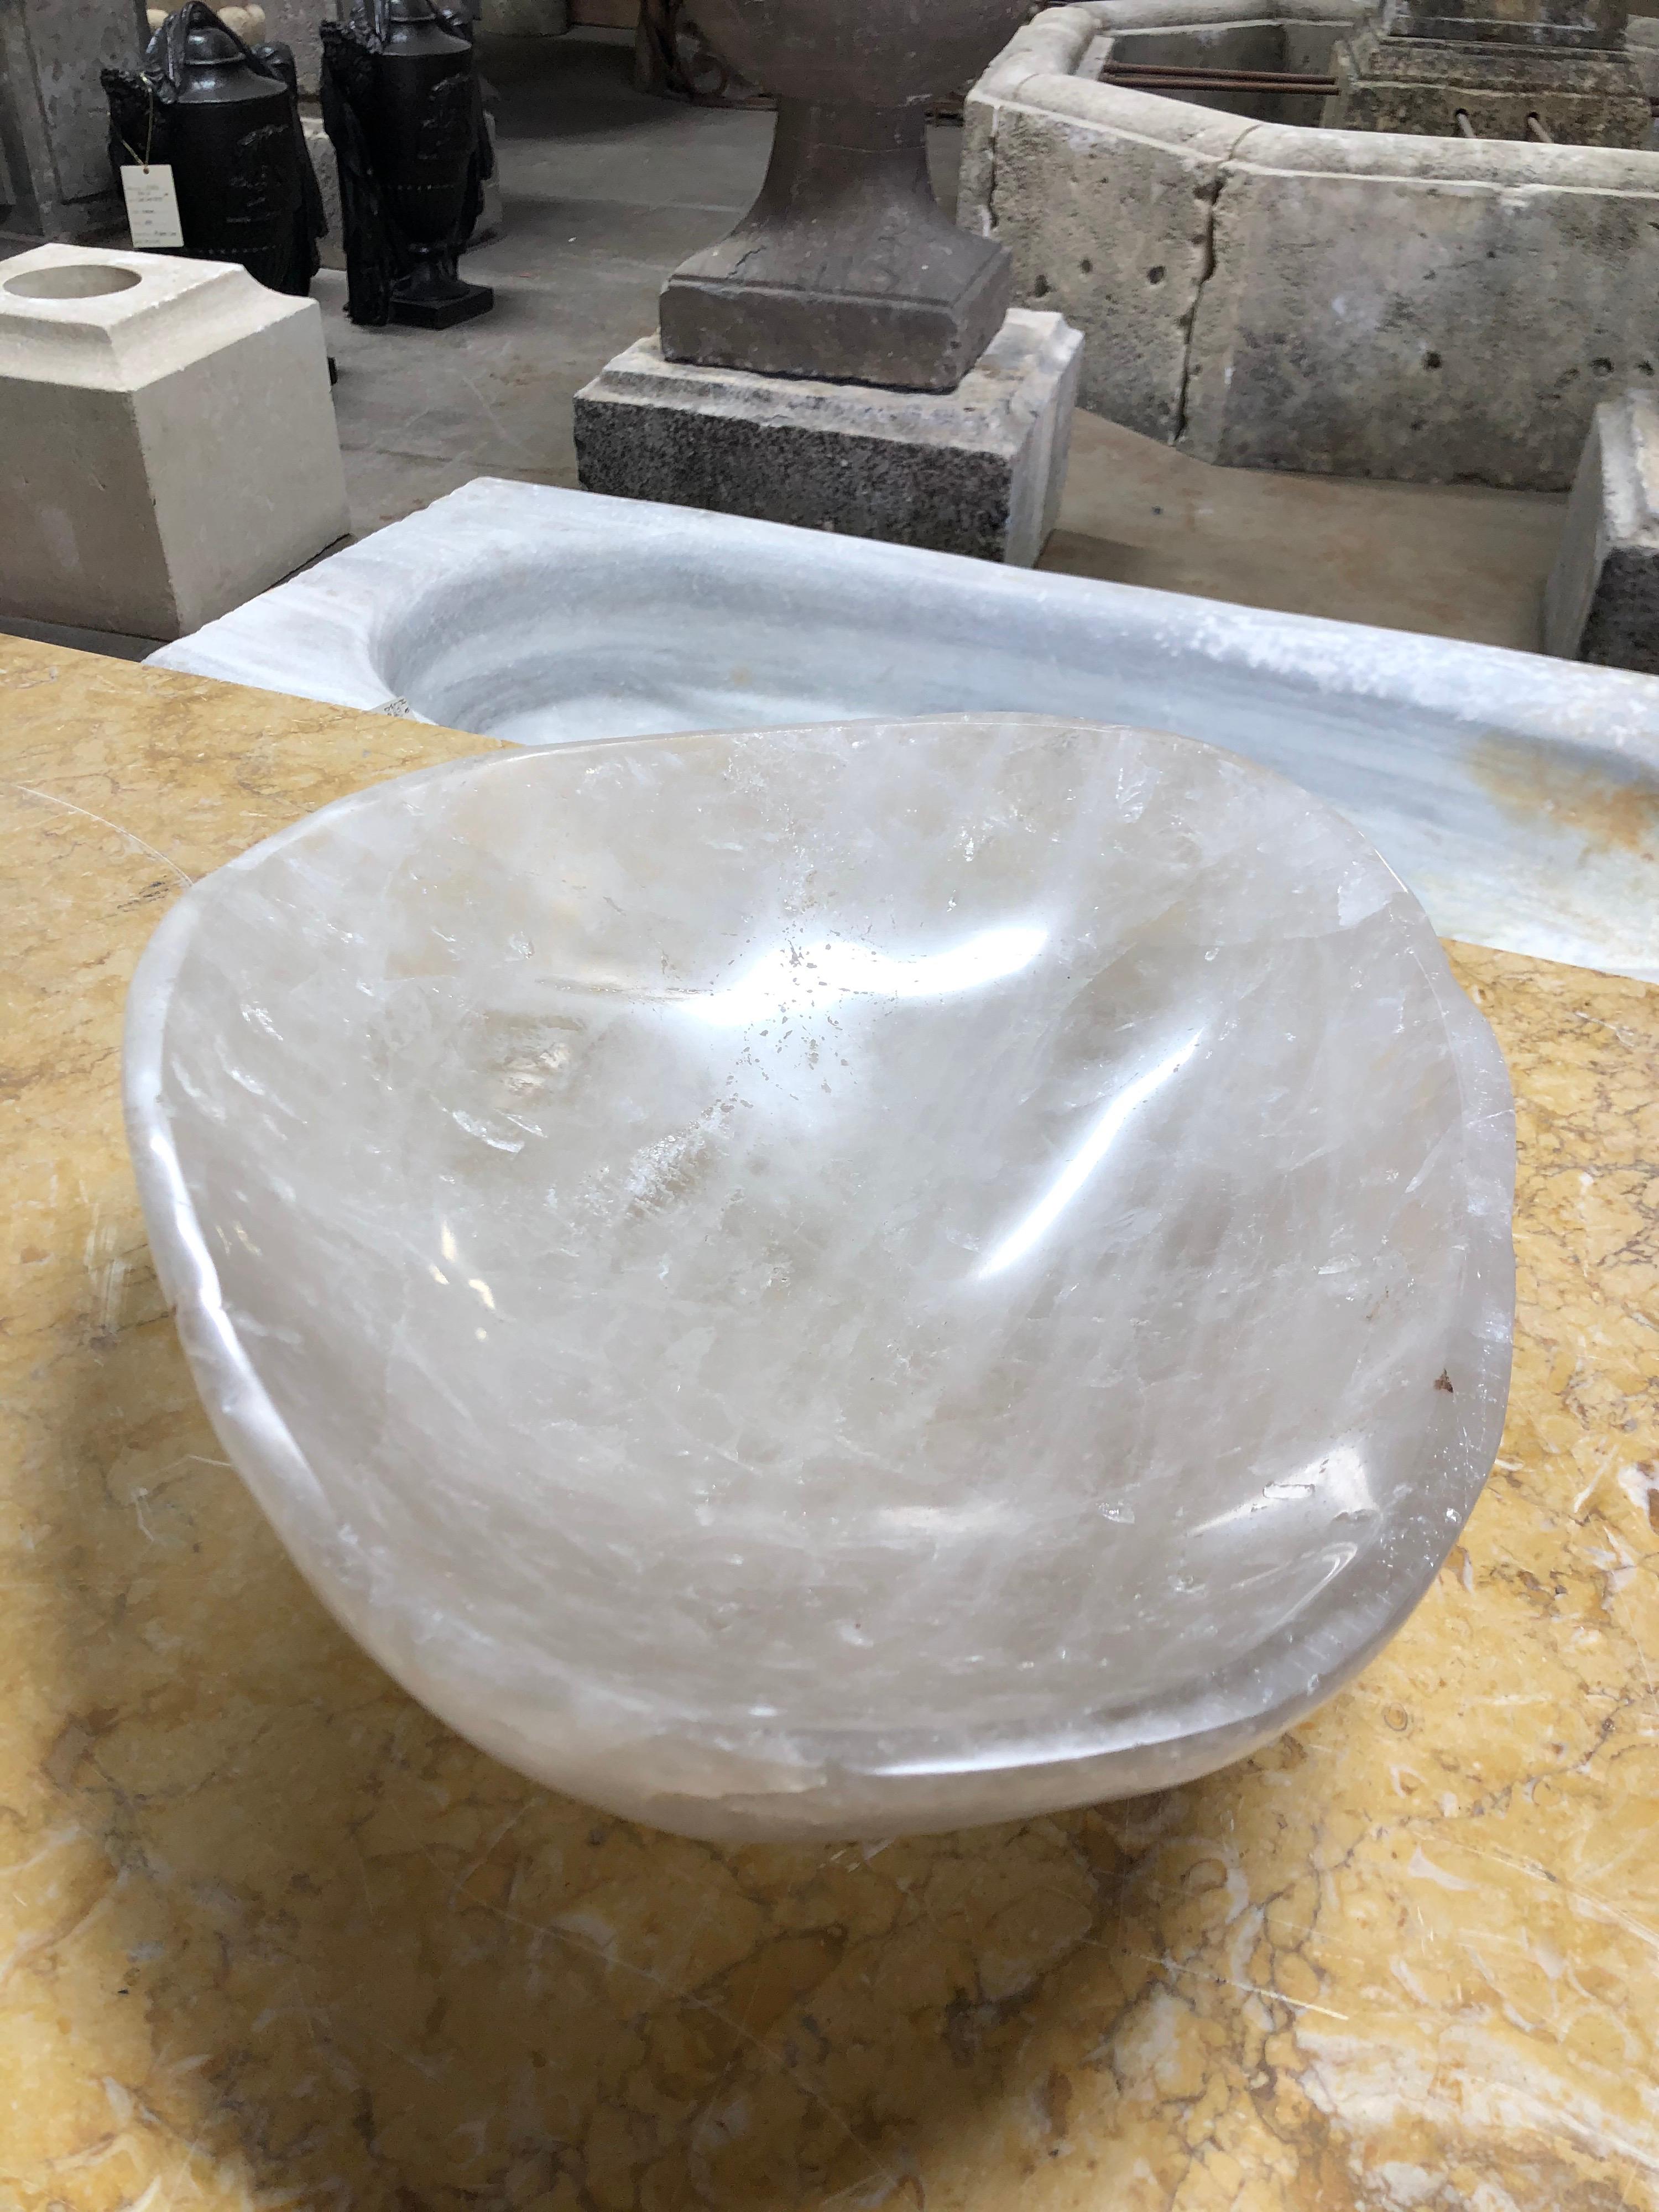 Hand carved rock crystal sink from South America. A beautiful addition to a contemporary or traditional home.

